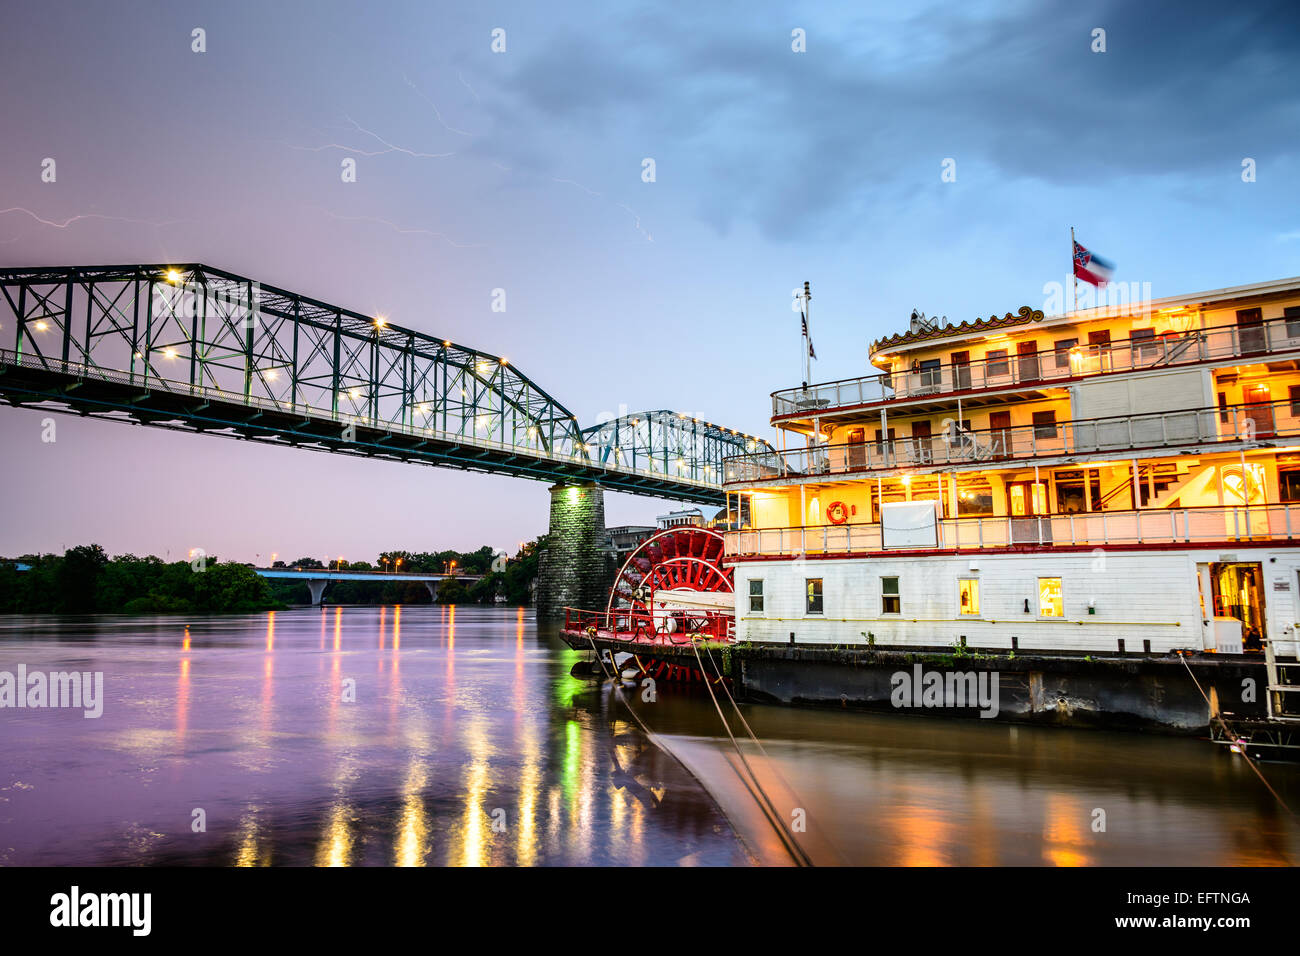 Chattanooga, Tennessee, USA sur la rivière Tennessee. Banque D'Images